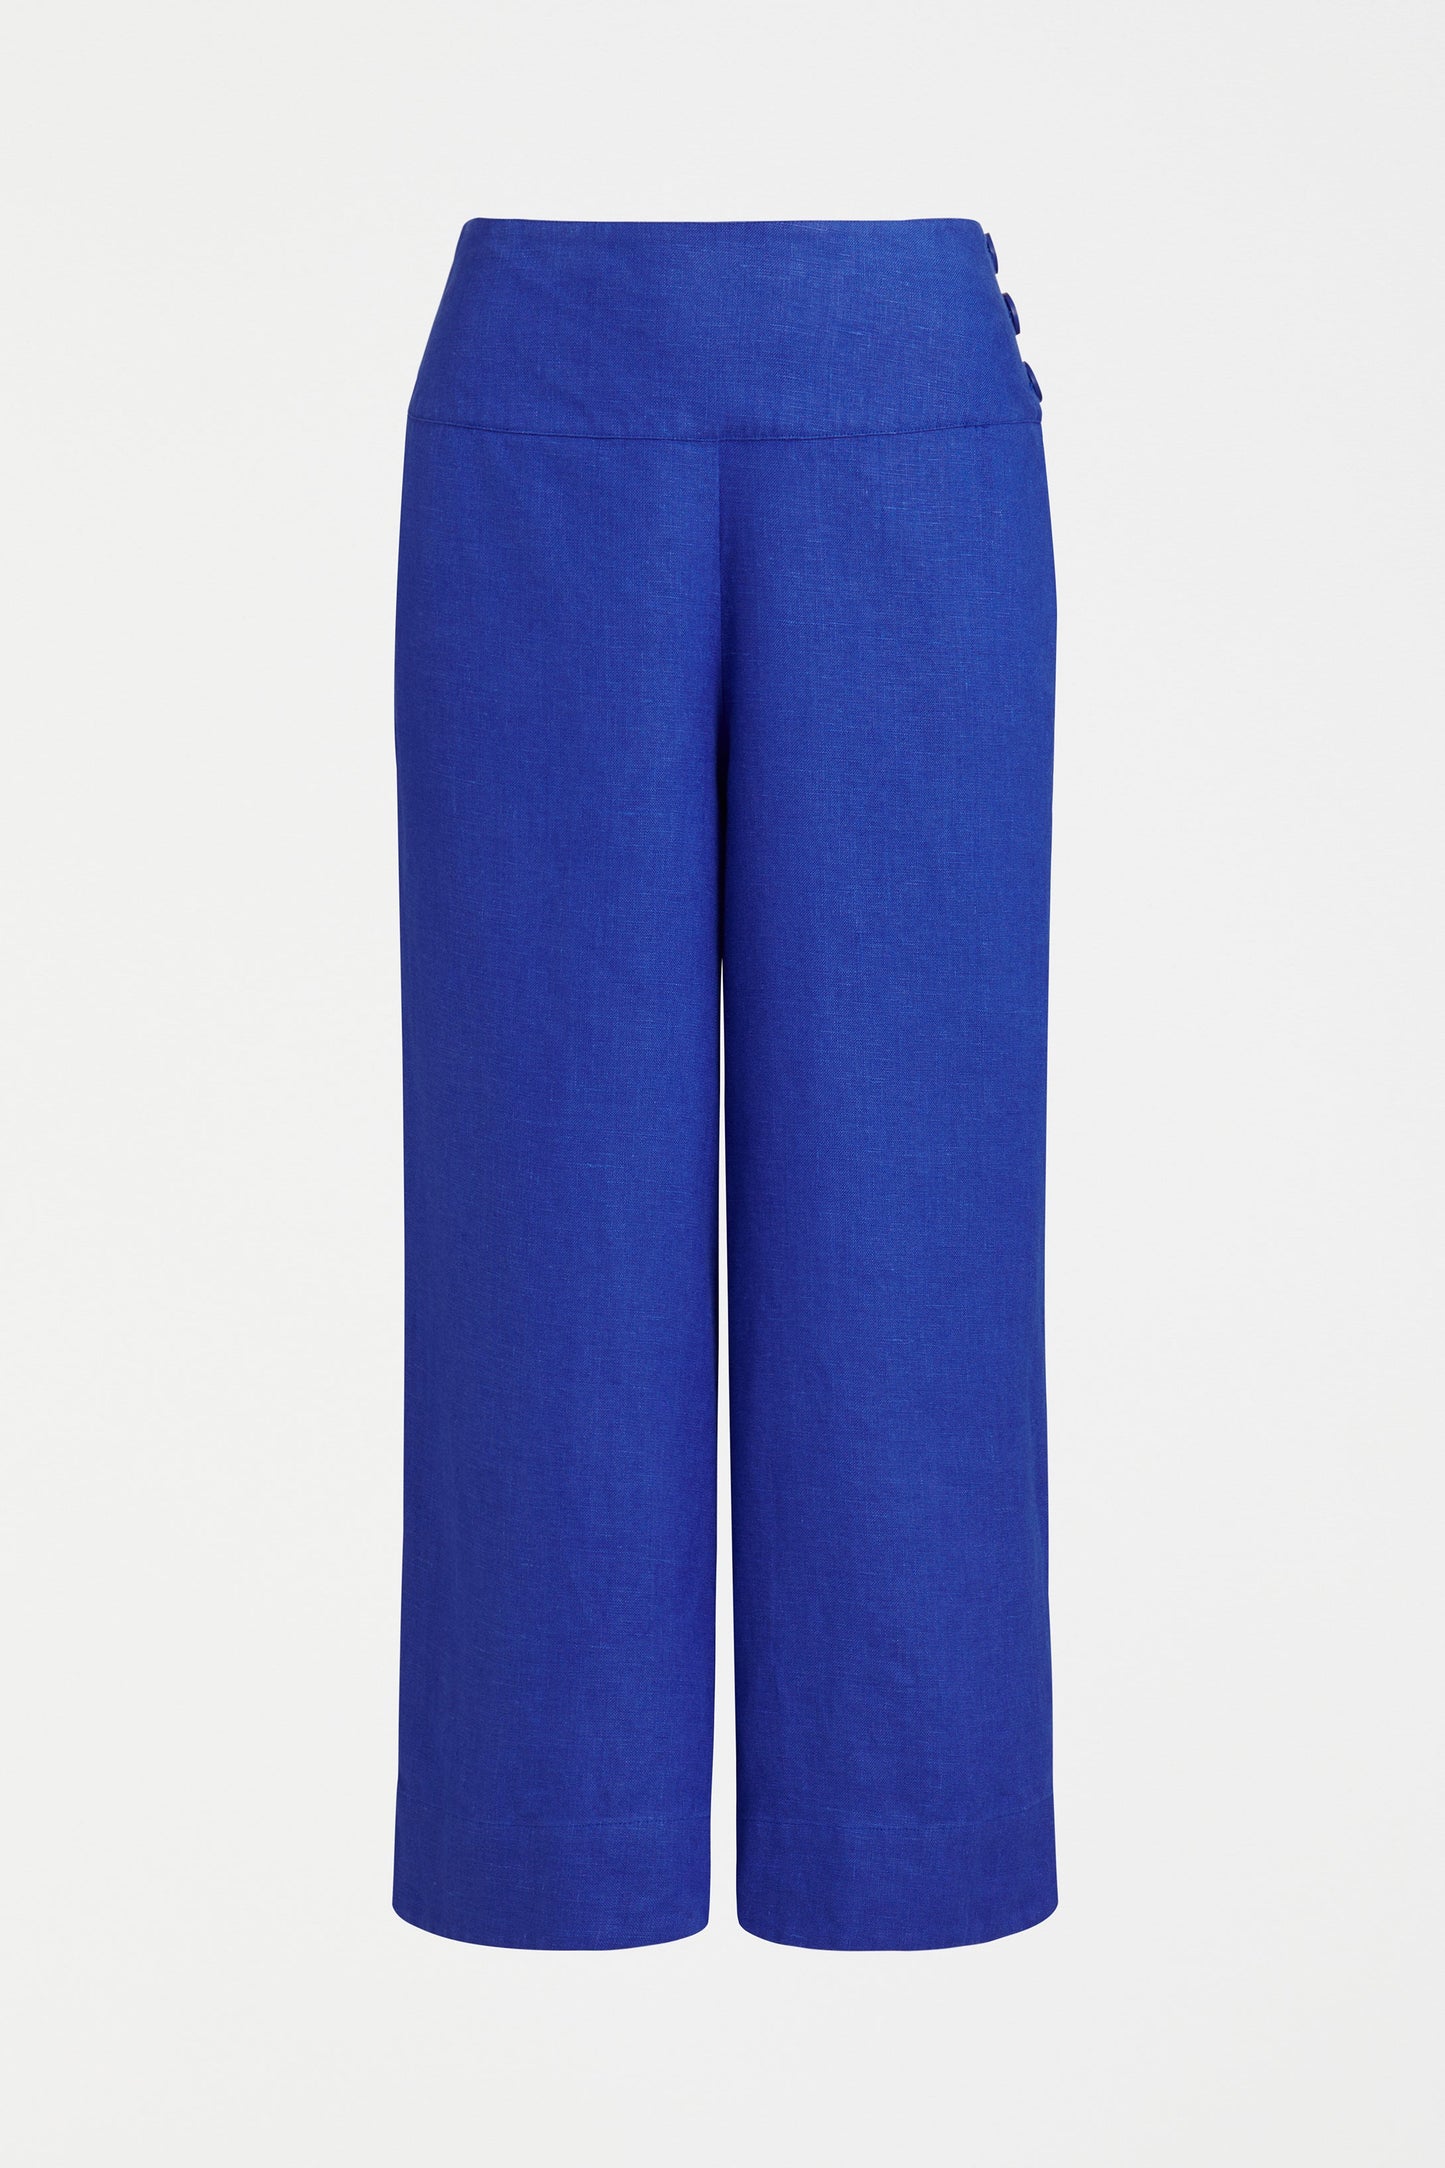 Olsson High Waisted Cropped Linen Pant Front | ULTRAMARINE